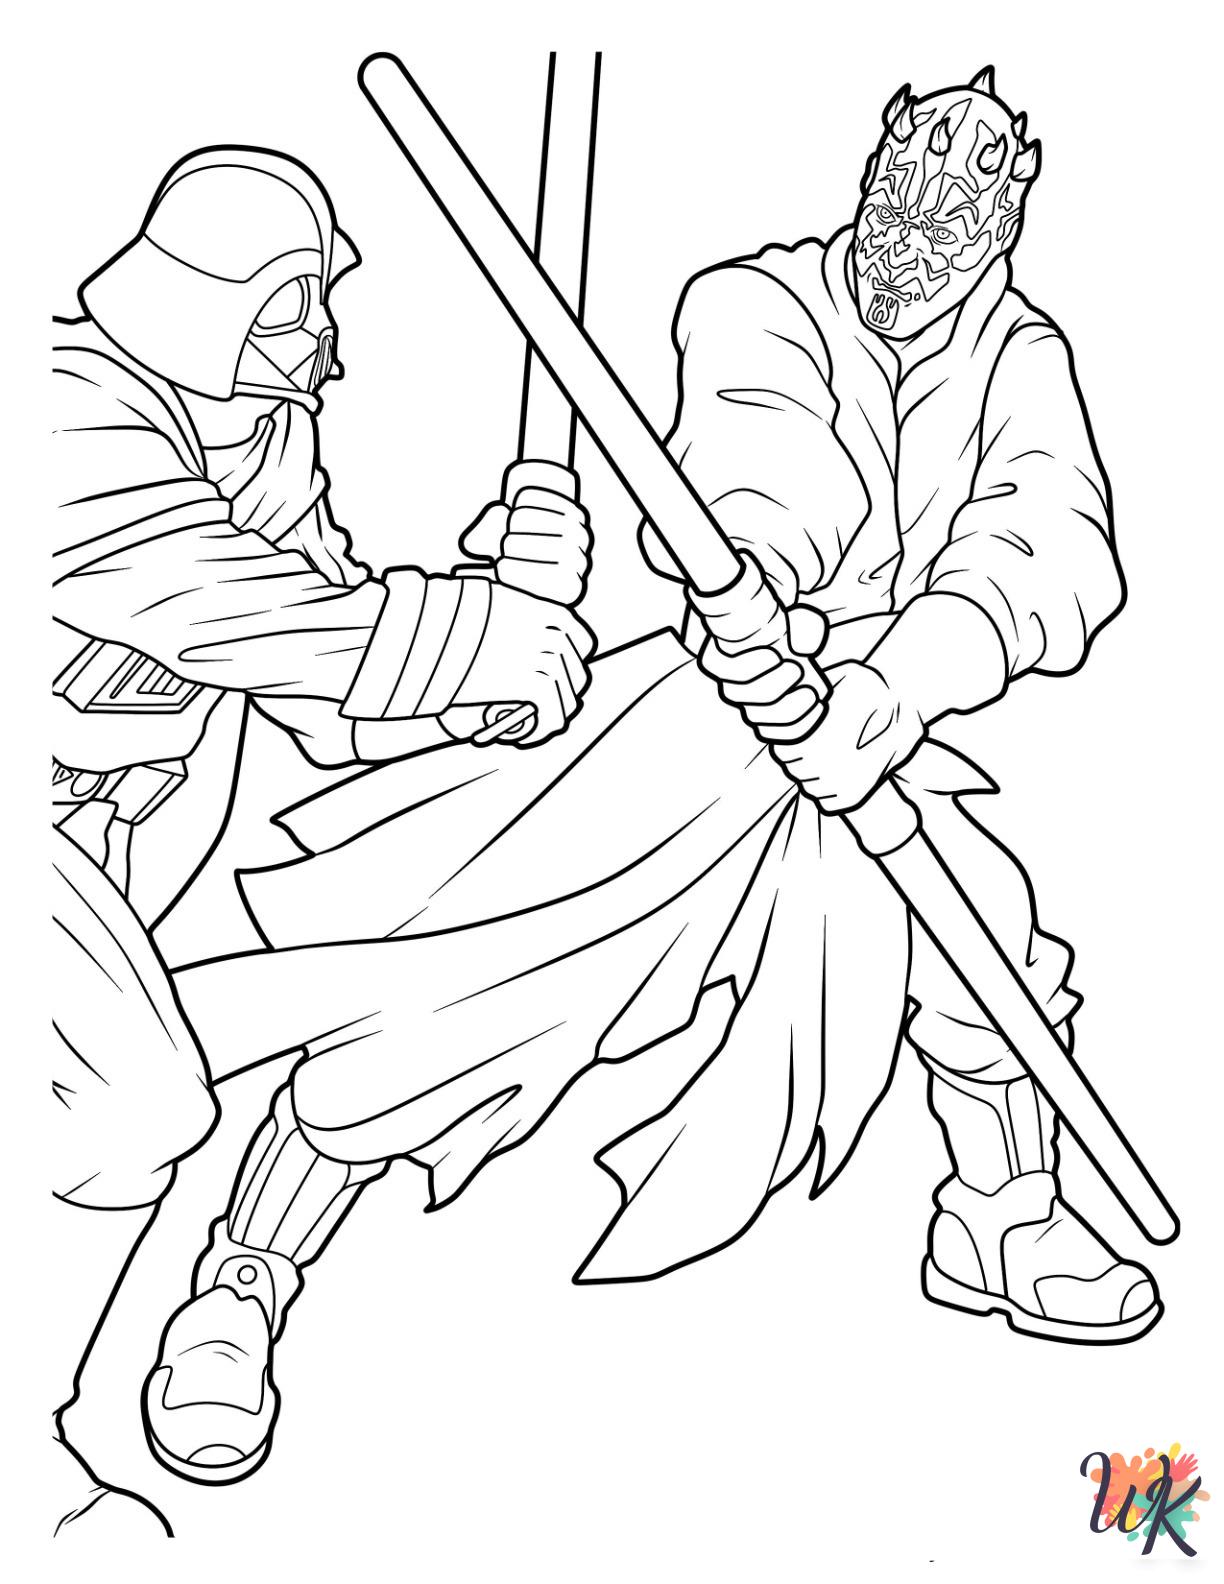 Darth Vader Coloring Pages 11